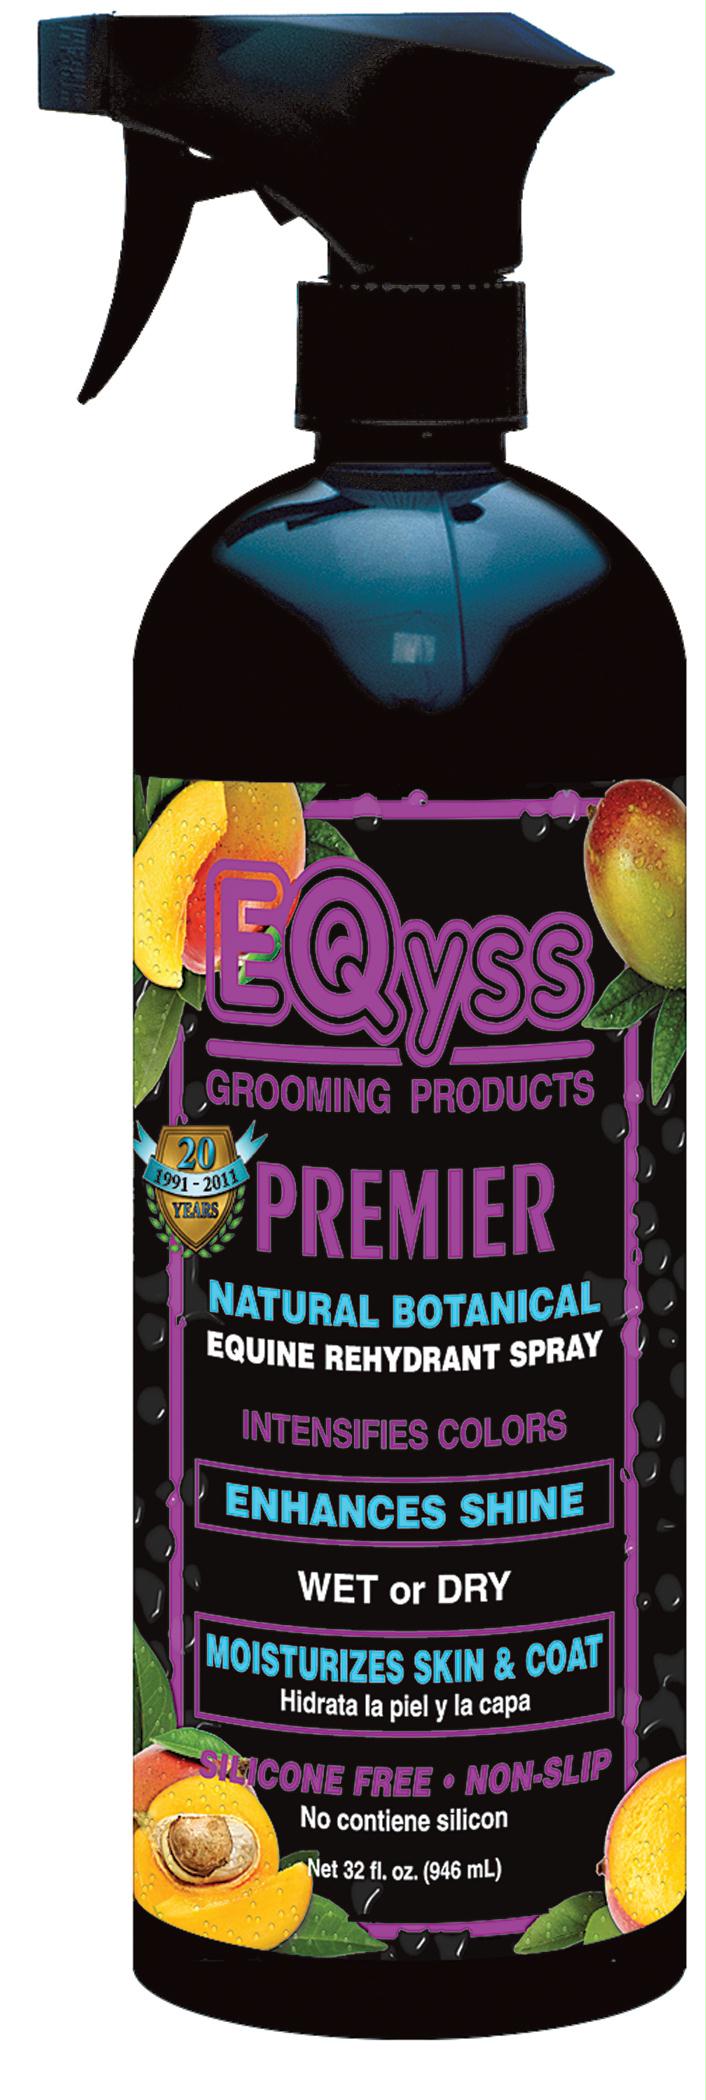 Premier Natural Botanical Equine Rehydrant Spray - aomega-products